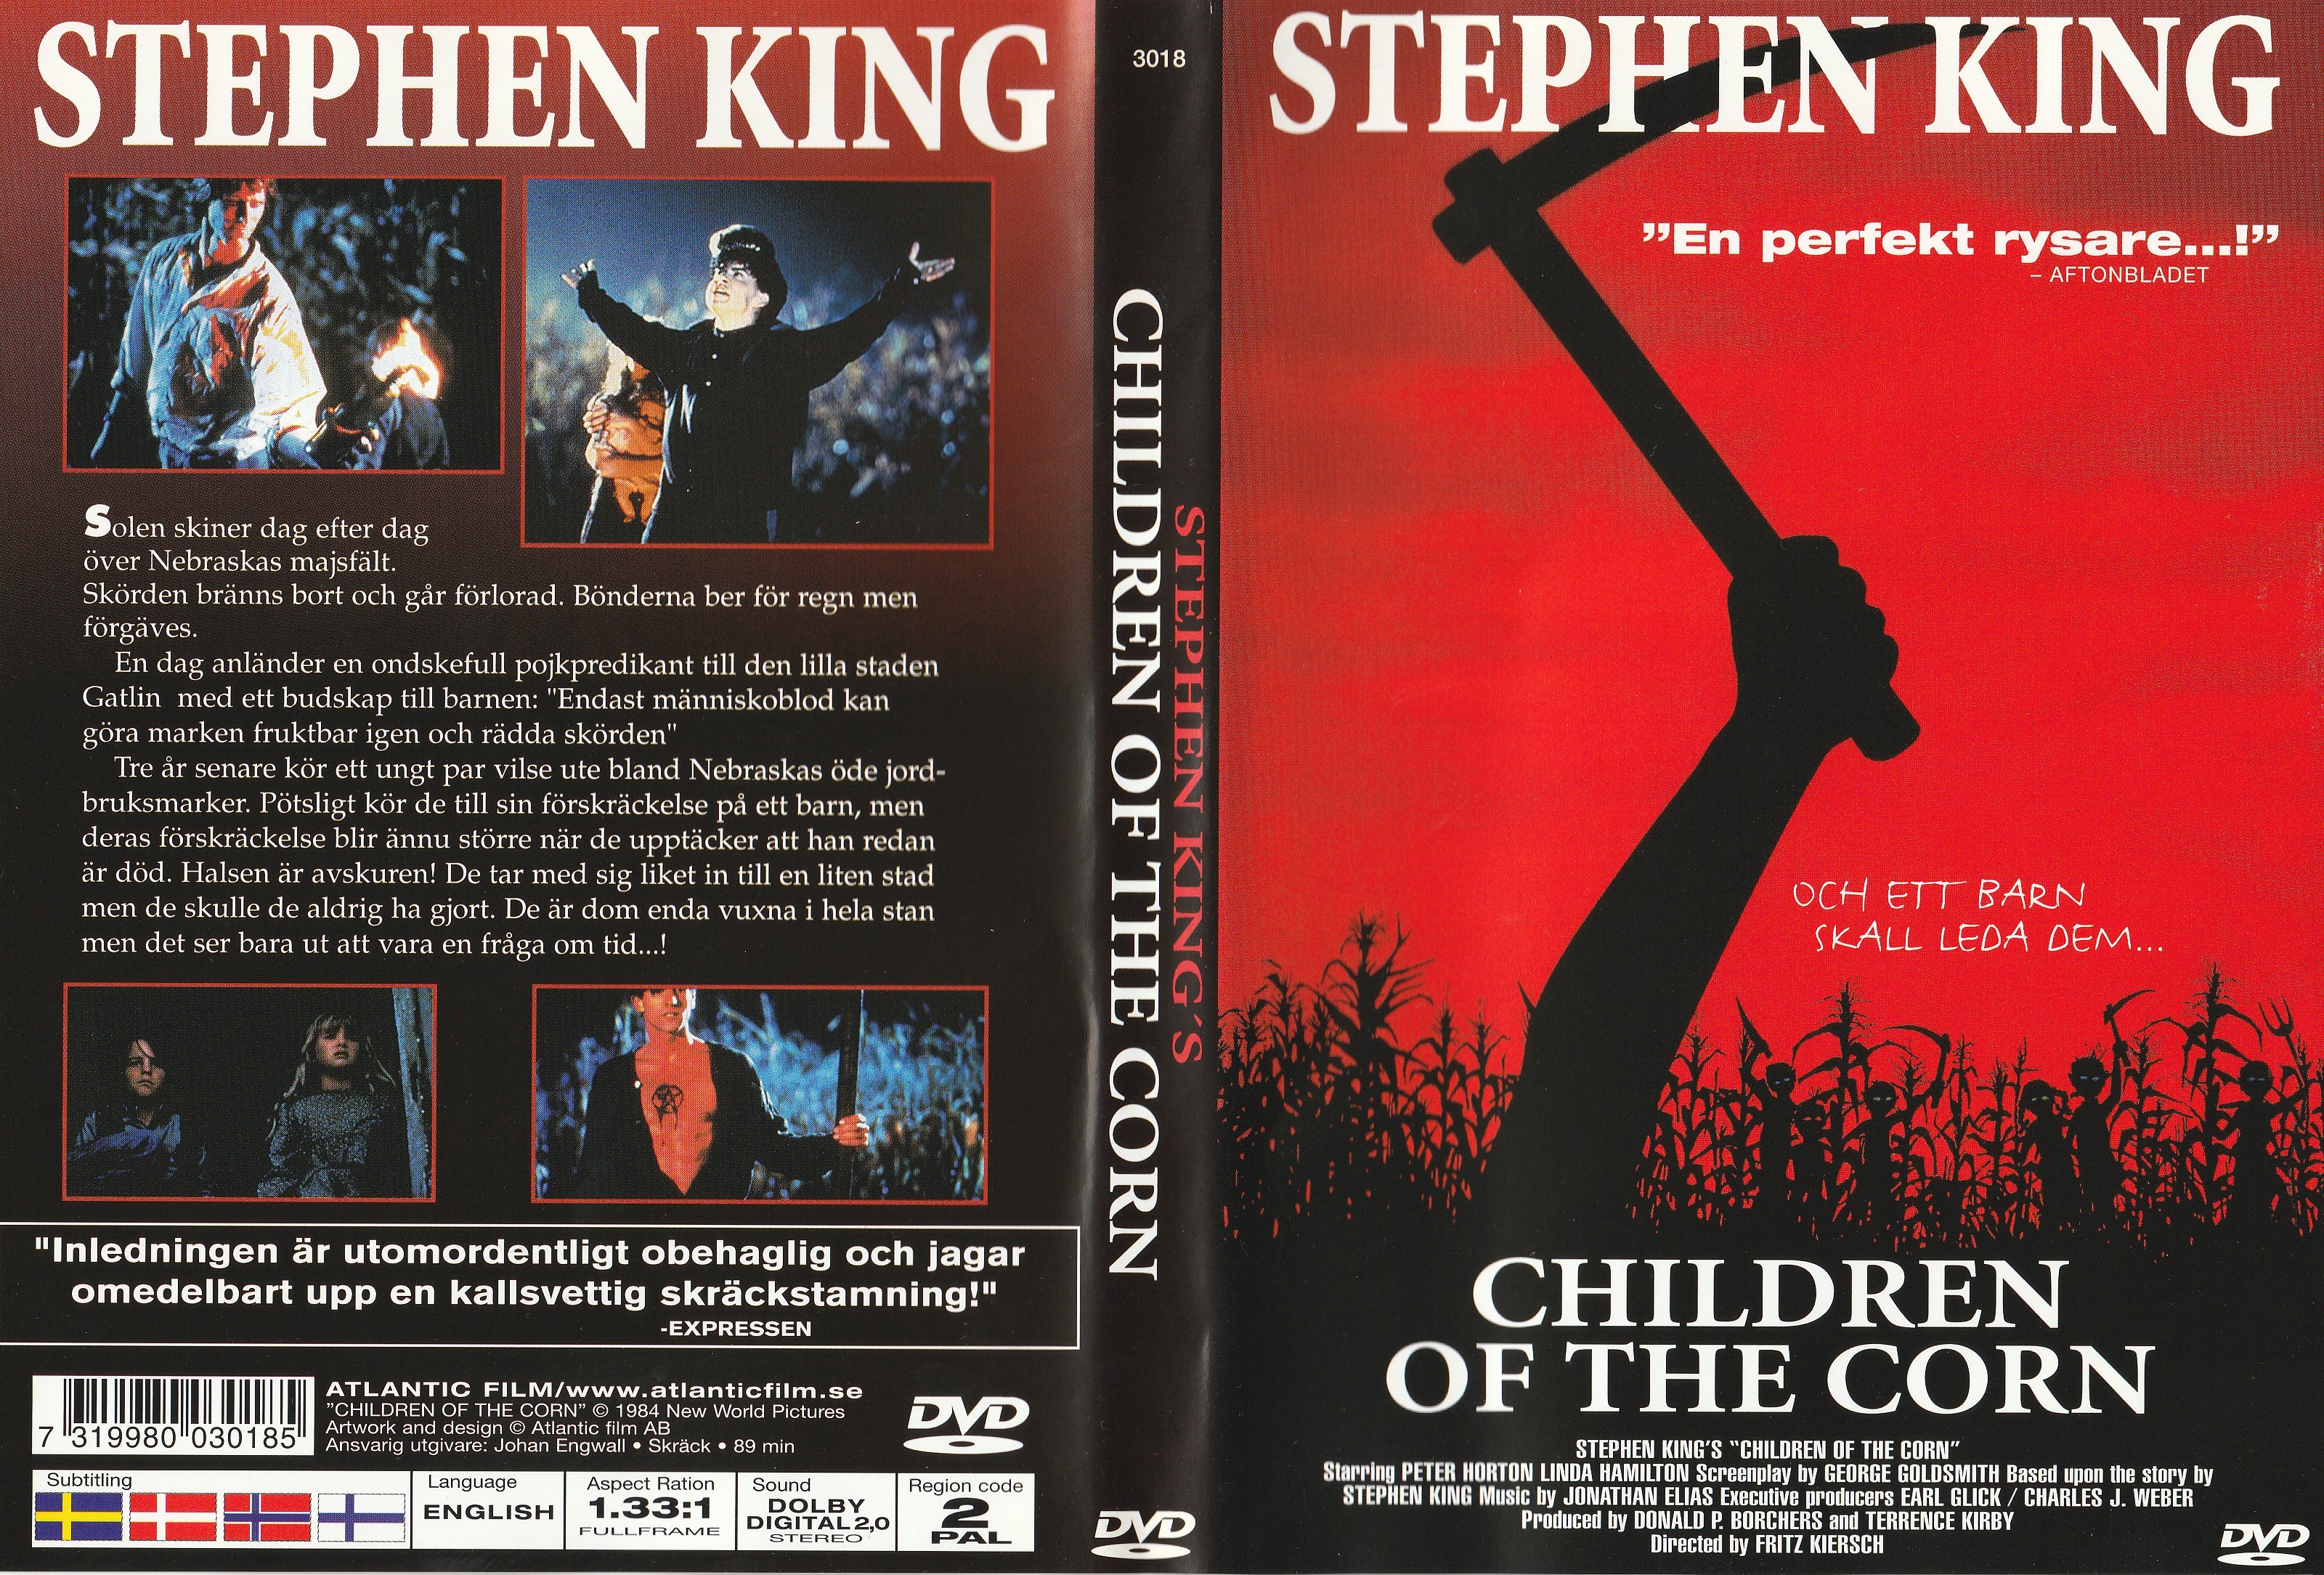 Stephen King - Children of the Corn 1 - 1984 He Who Walks Behind The Rows